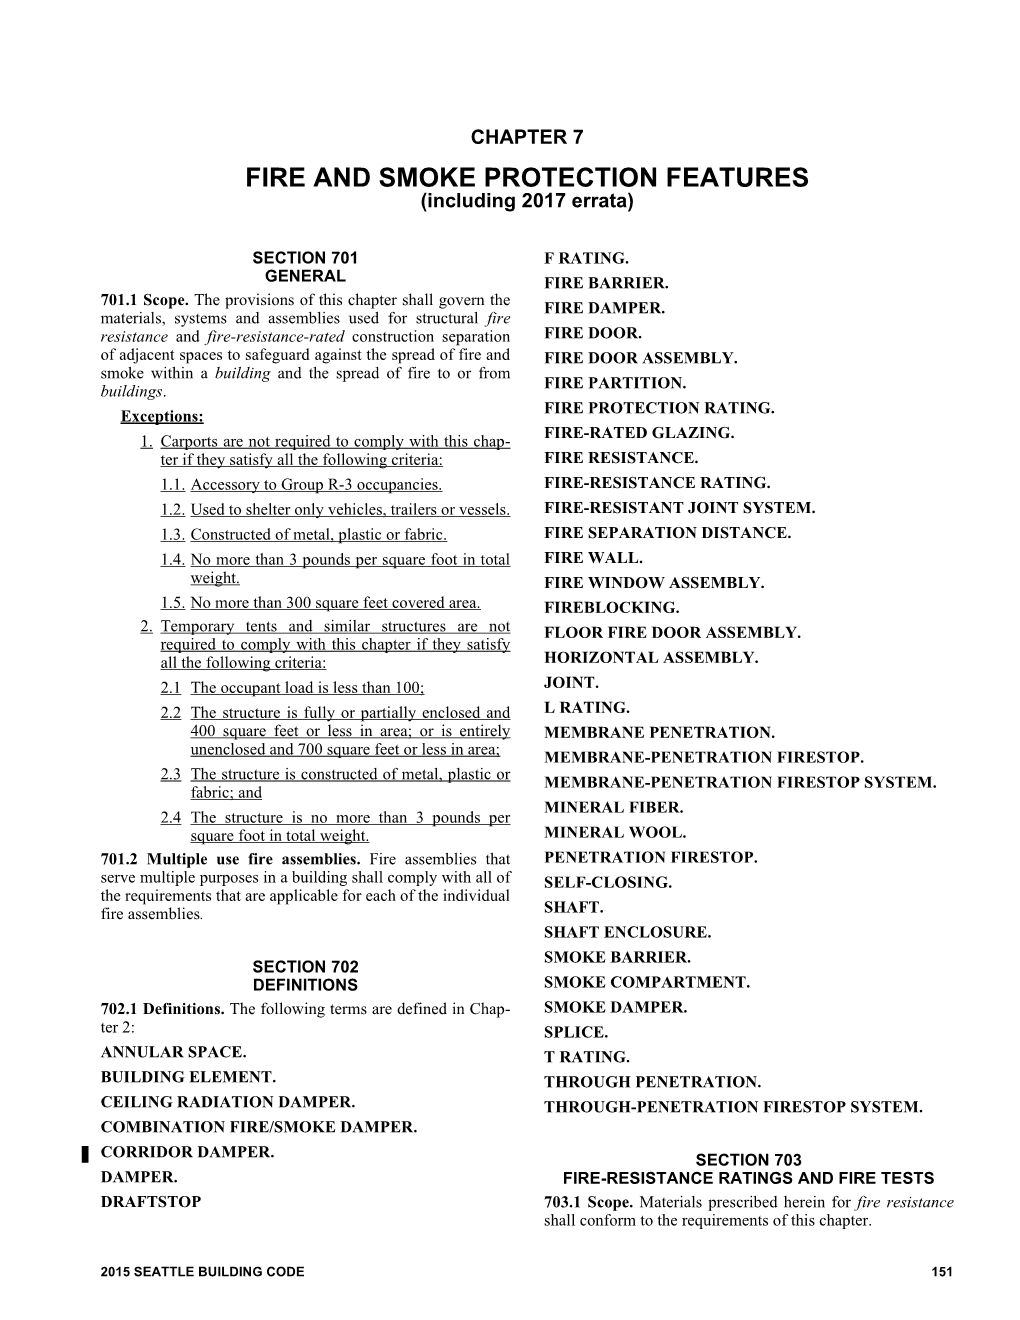 Seattle Building Code, Chapter 7, Fire and Smoke Protection Features